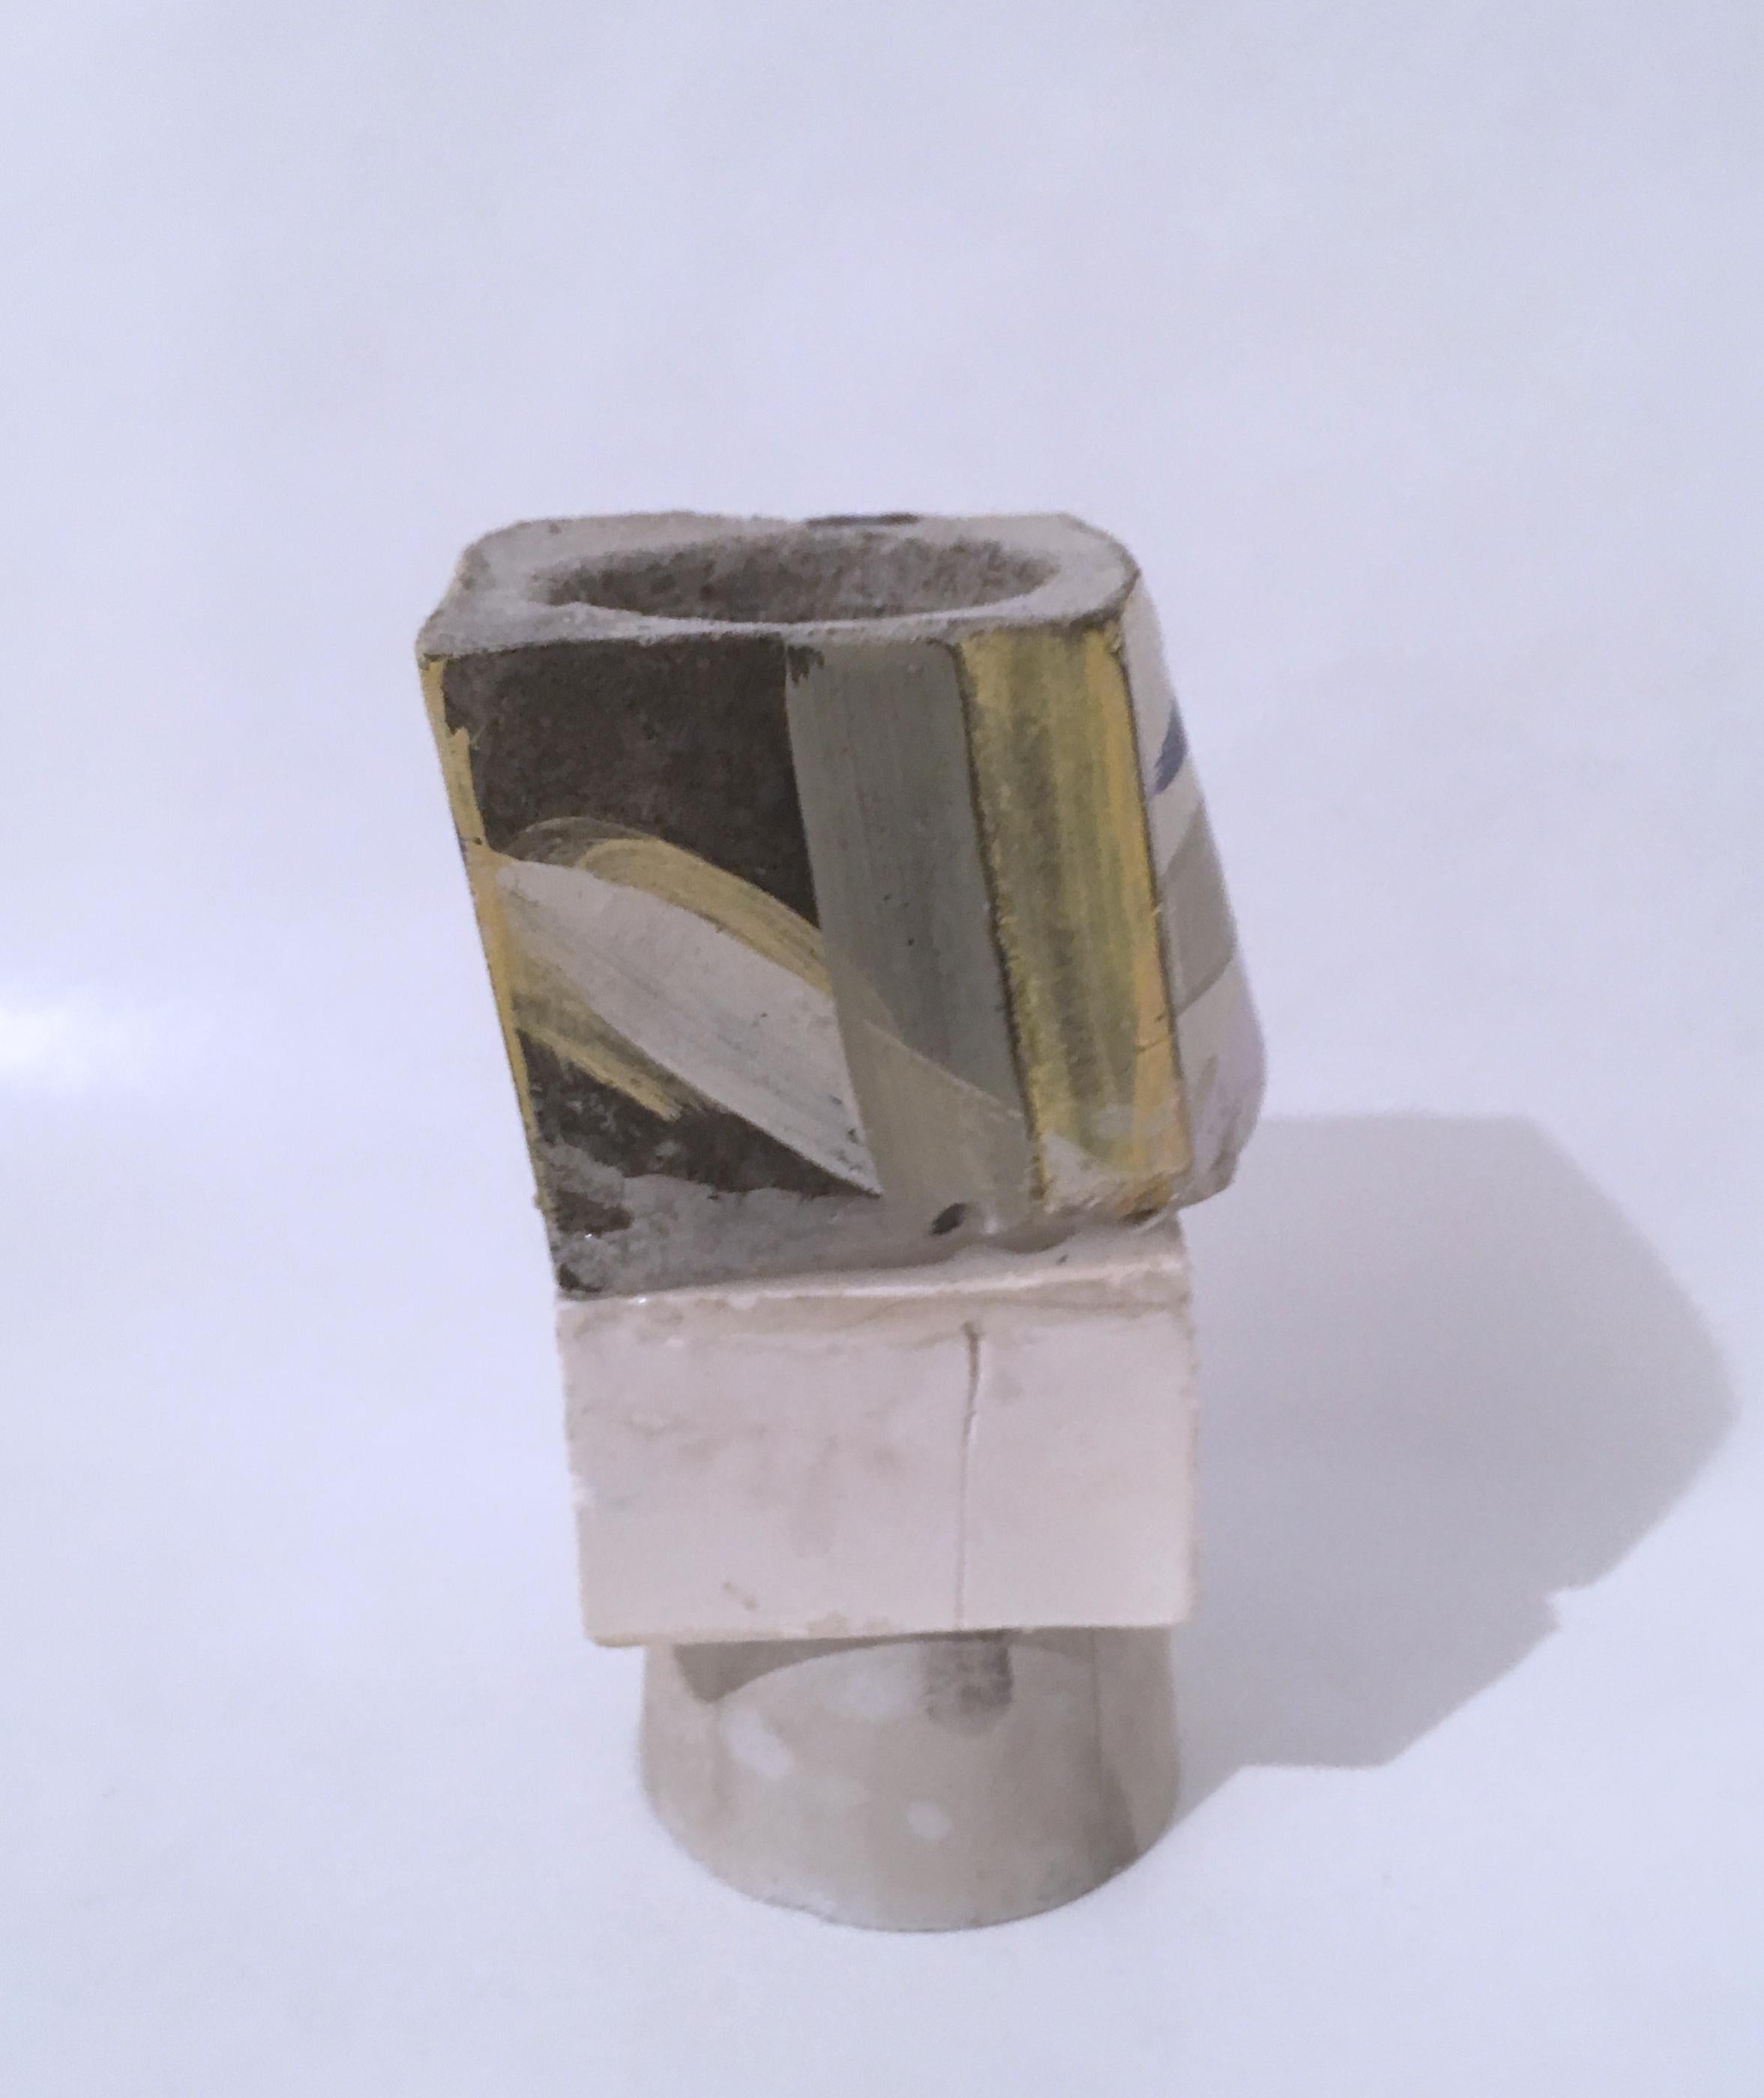 Layered Cube Votive Sculpture (sand), pastel, geometric, earthy, candle holder - Gray Abstract Sculpture by Dena Paige Fischer